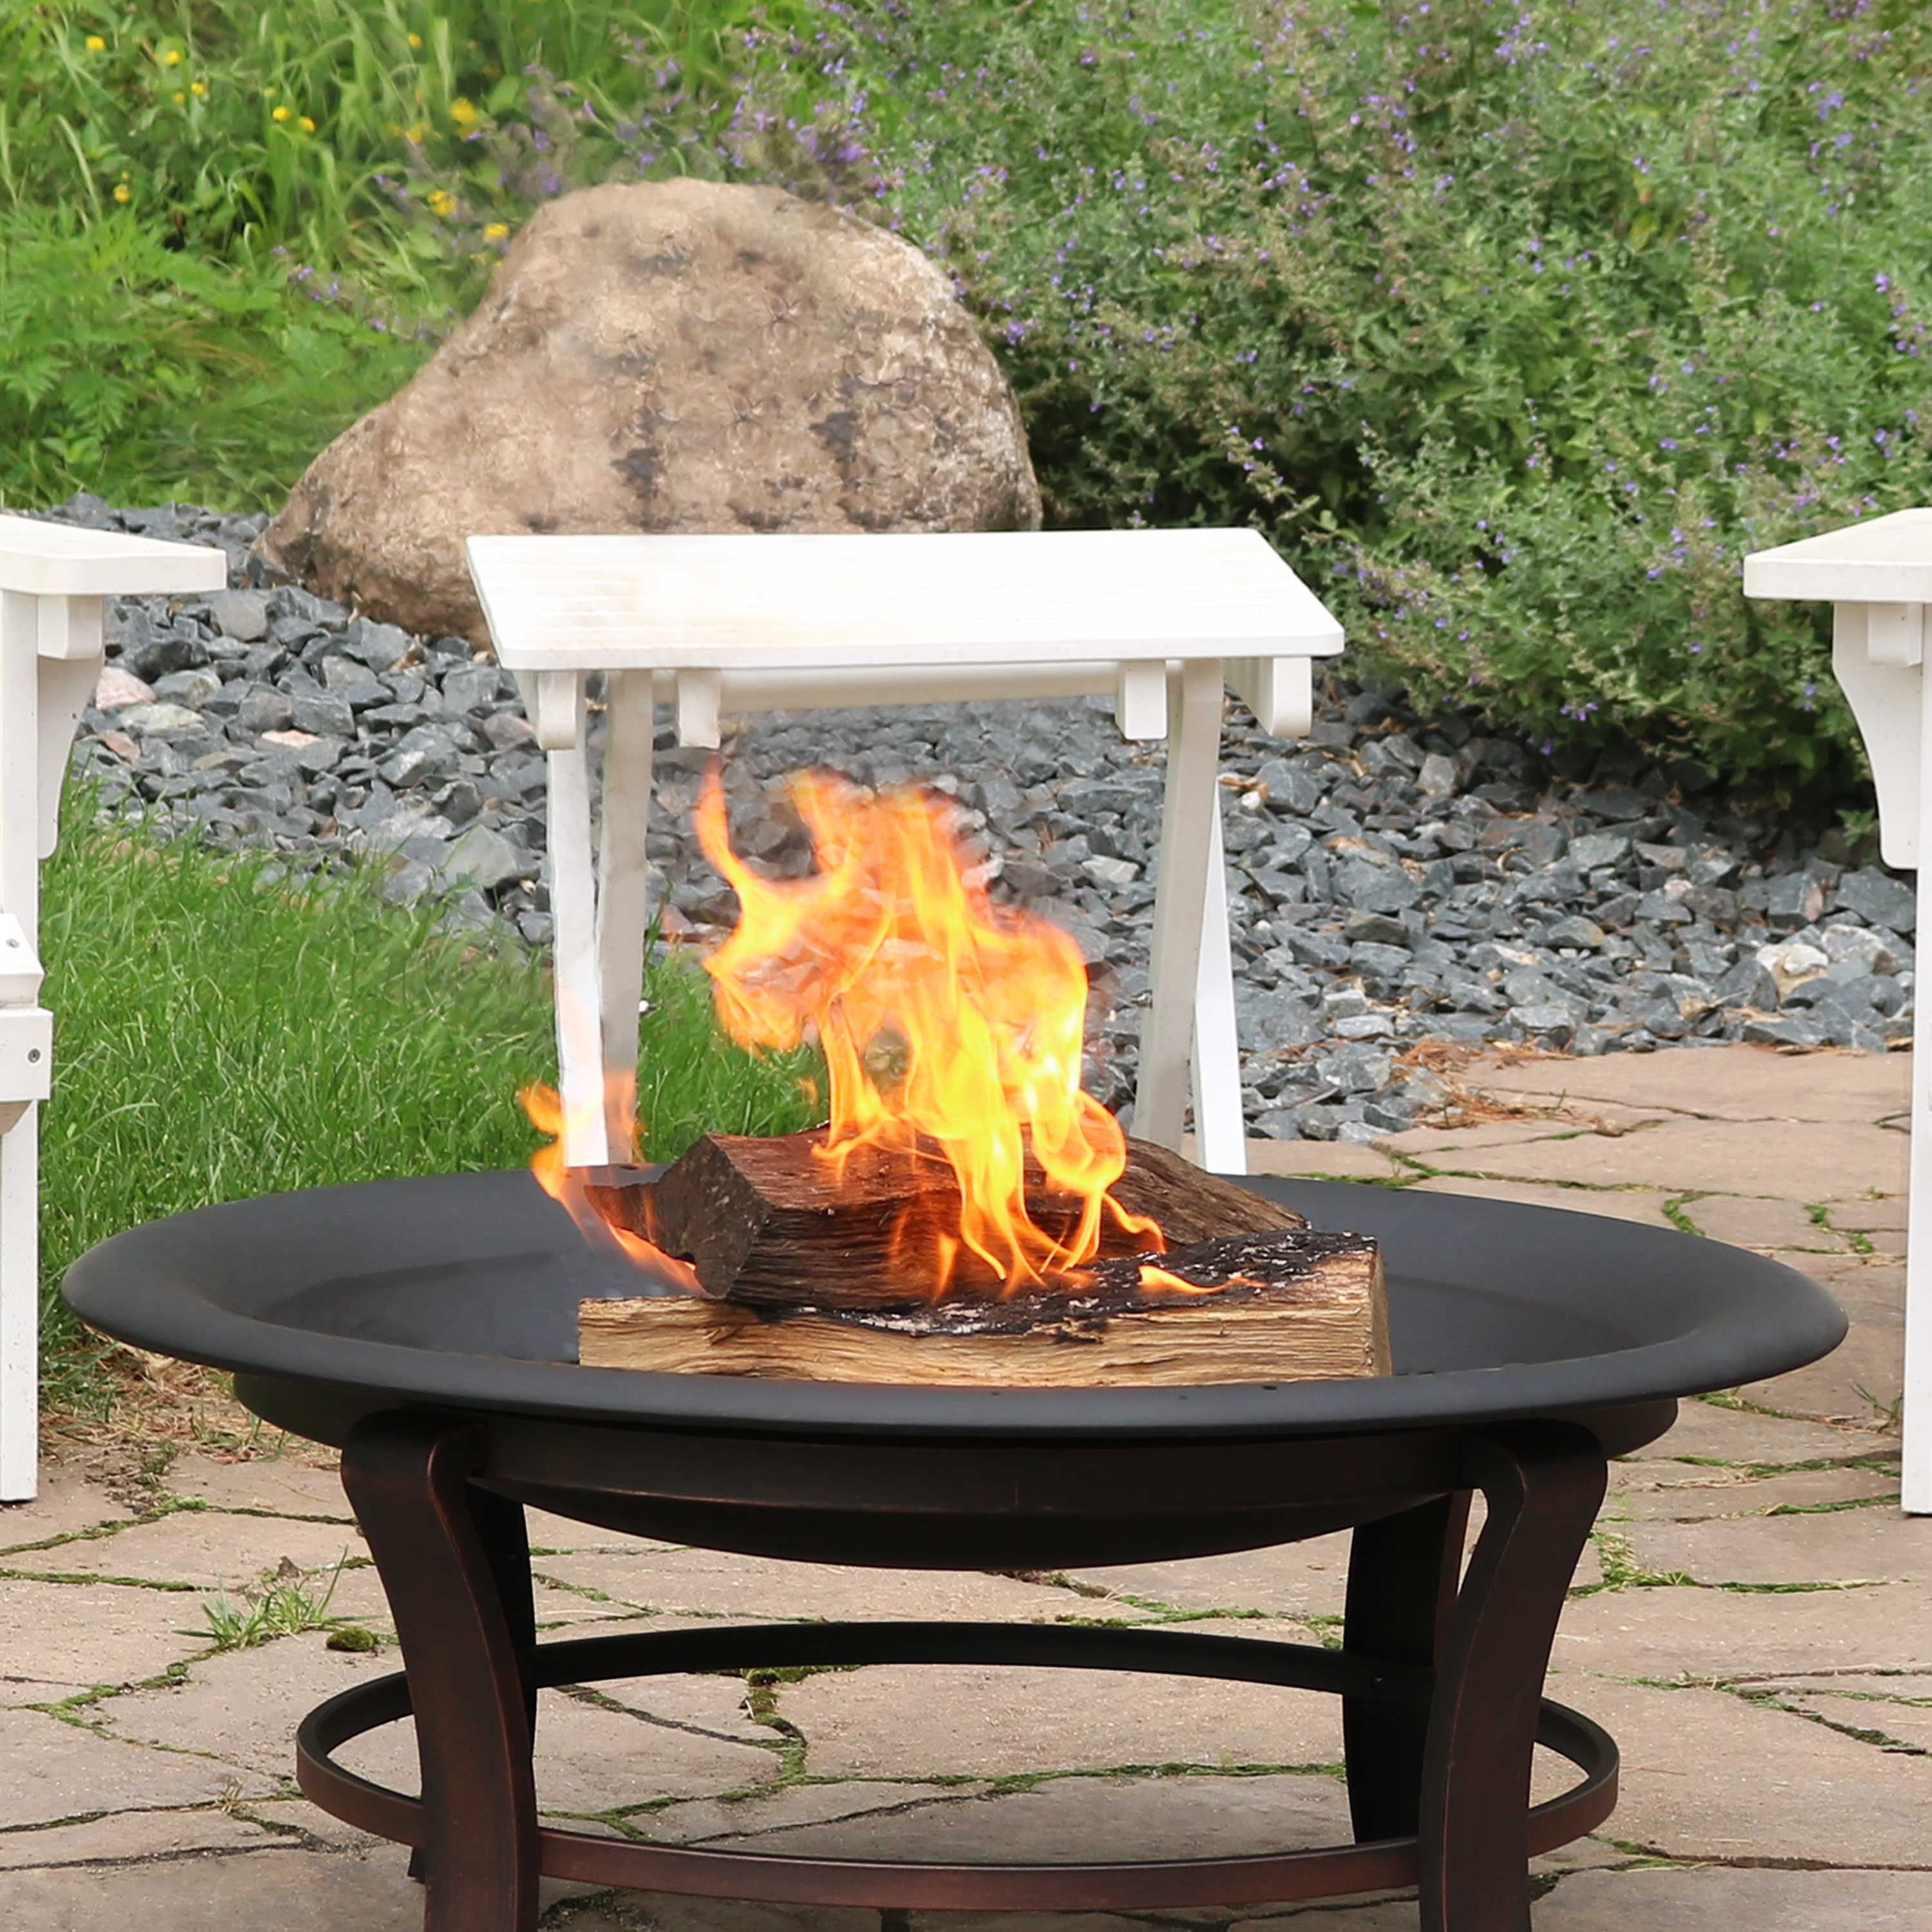 Sunnydaze Outdoor Replacement Fire Bowl, Round Fire Pit Bowl Insert